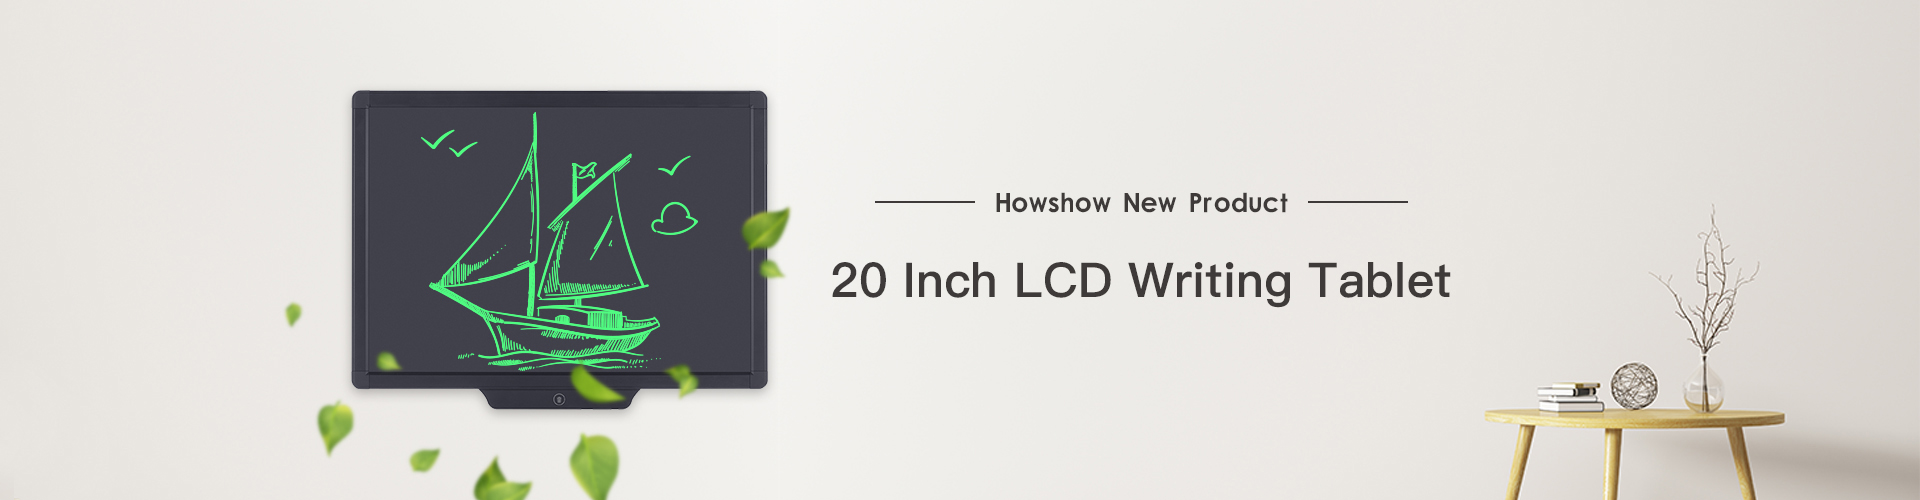 Howshow New Product : 20 Inch LCD writing tablet